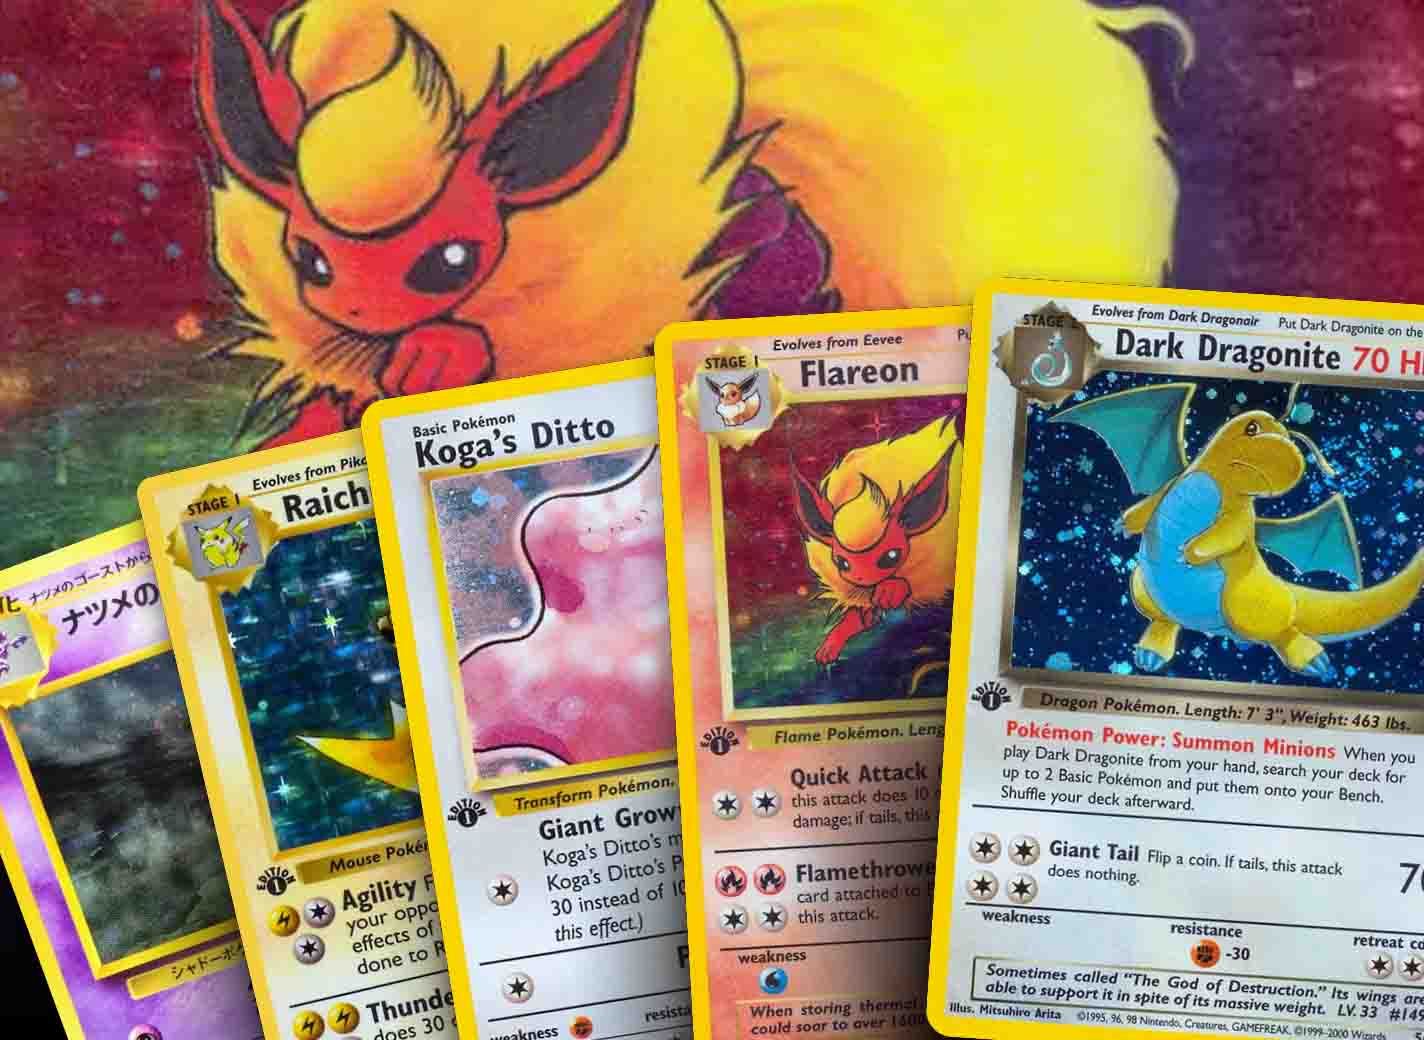 These Pokemon card binders where the characters aren't on the